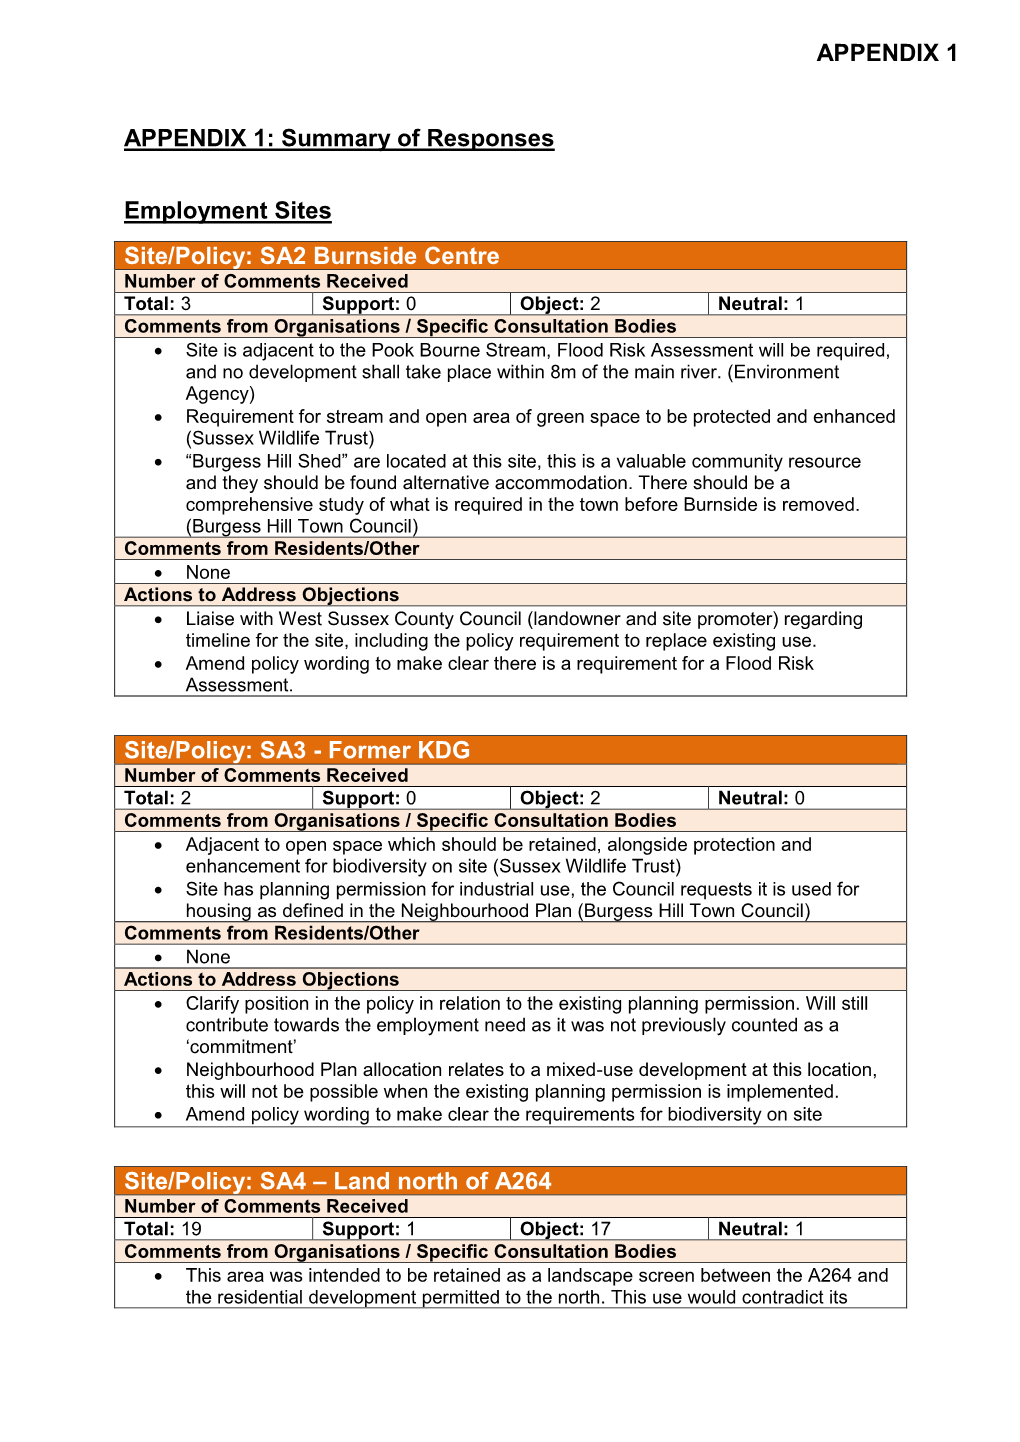 APPENDIX 1: Summary of Responses Employment Sites Site/Policy: SA2